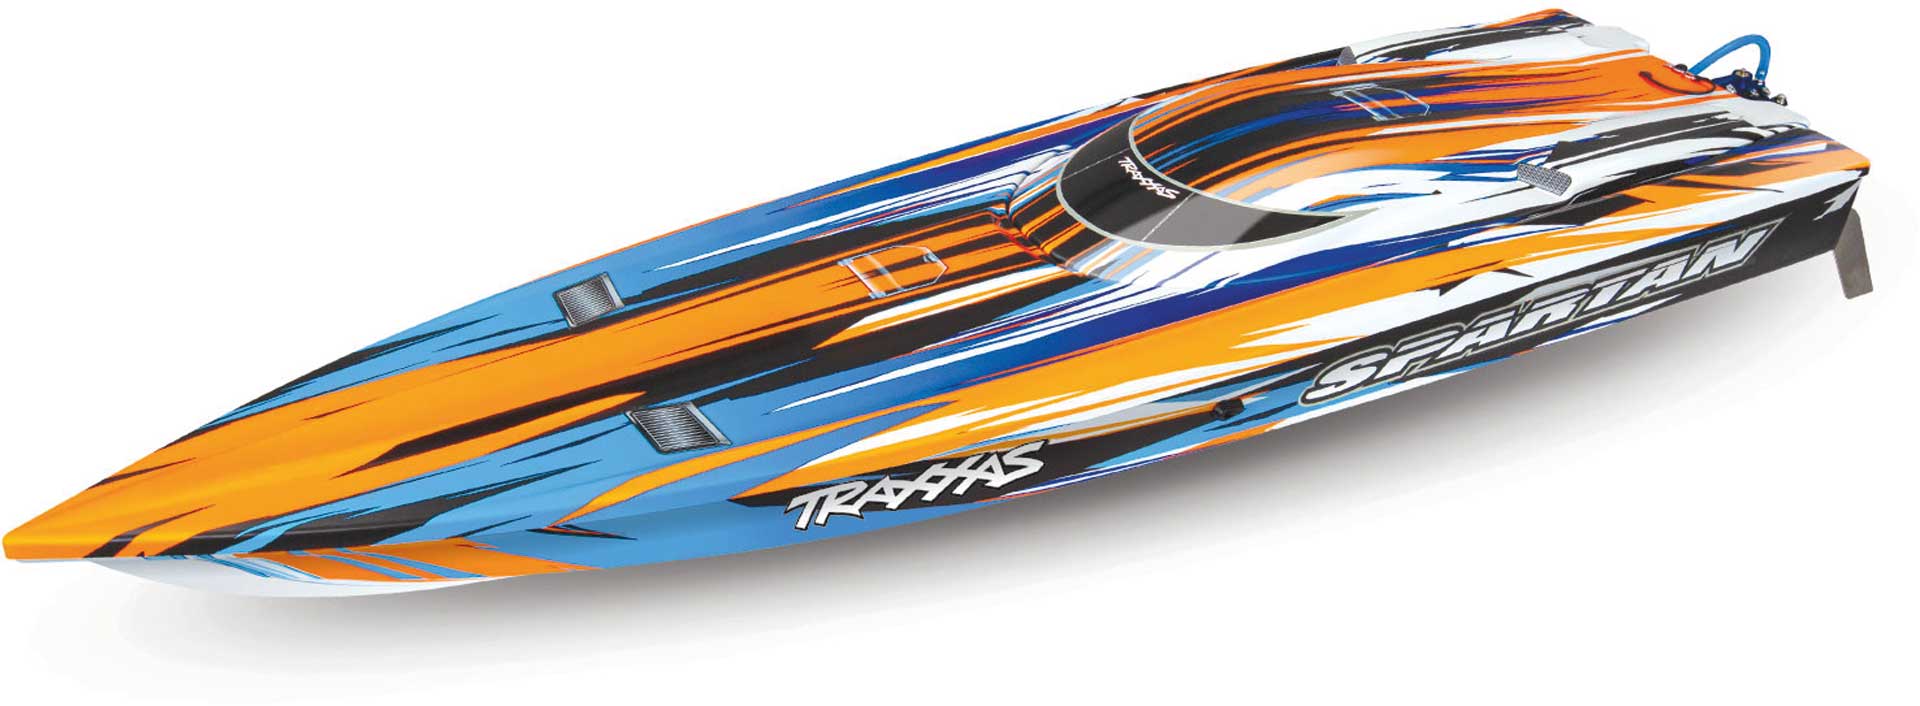 TRAXXAS SPARTAN ORANGE WITHOUT BATTERY/CHARGER BL-RACING BOAT BRUSHLESS